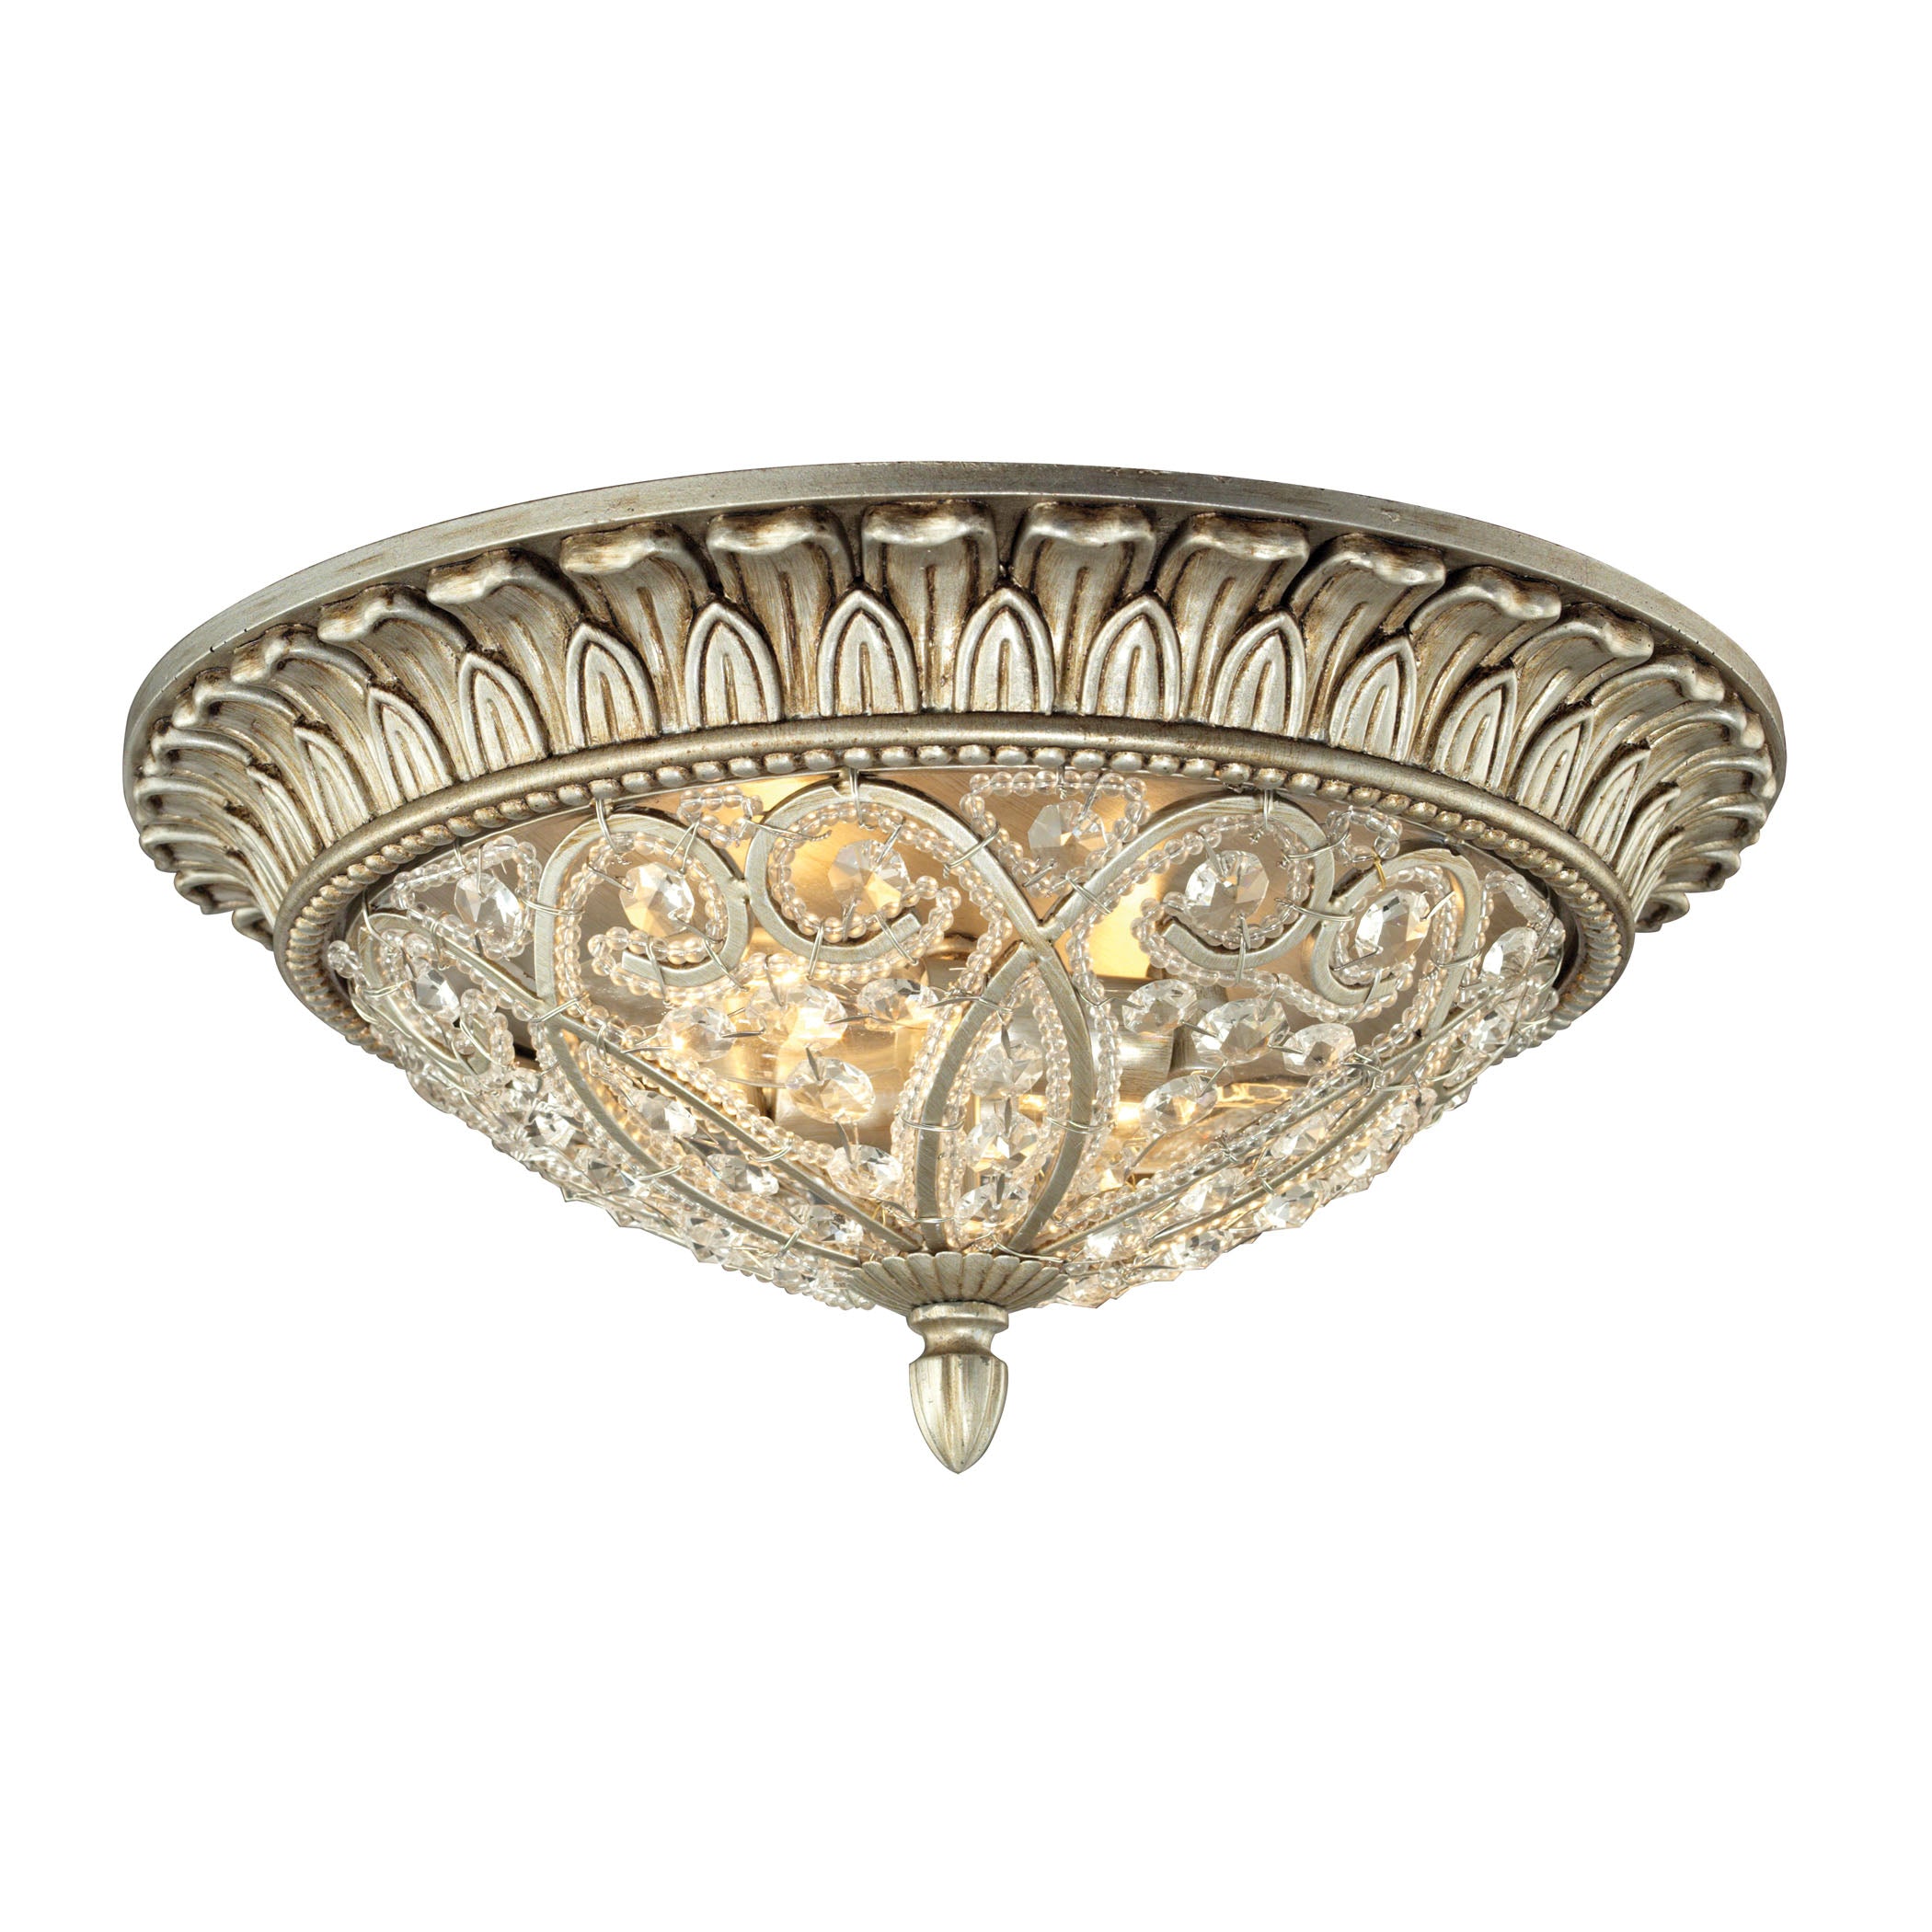 ELK Lighting 11693/2 Andalusia 2-Light Flush Mount in Aged Silver with Clear Crystal and Beaded Glass Diffuser